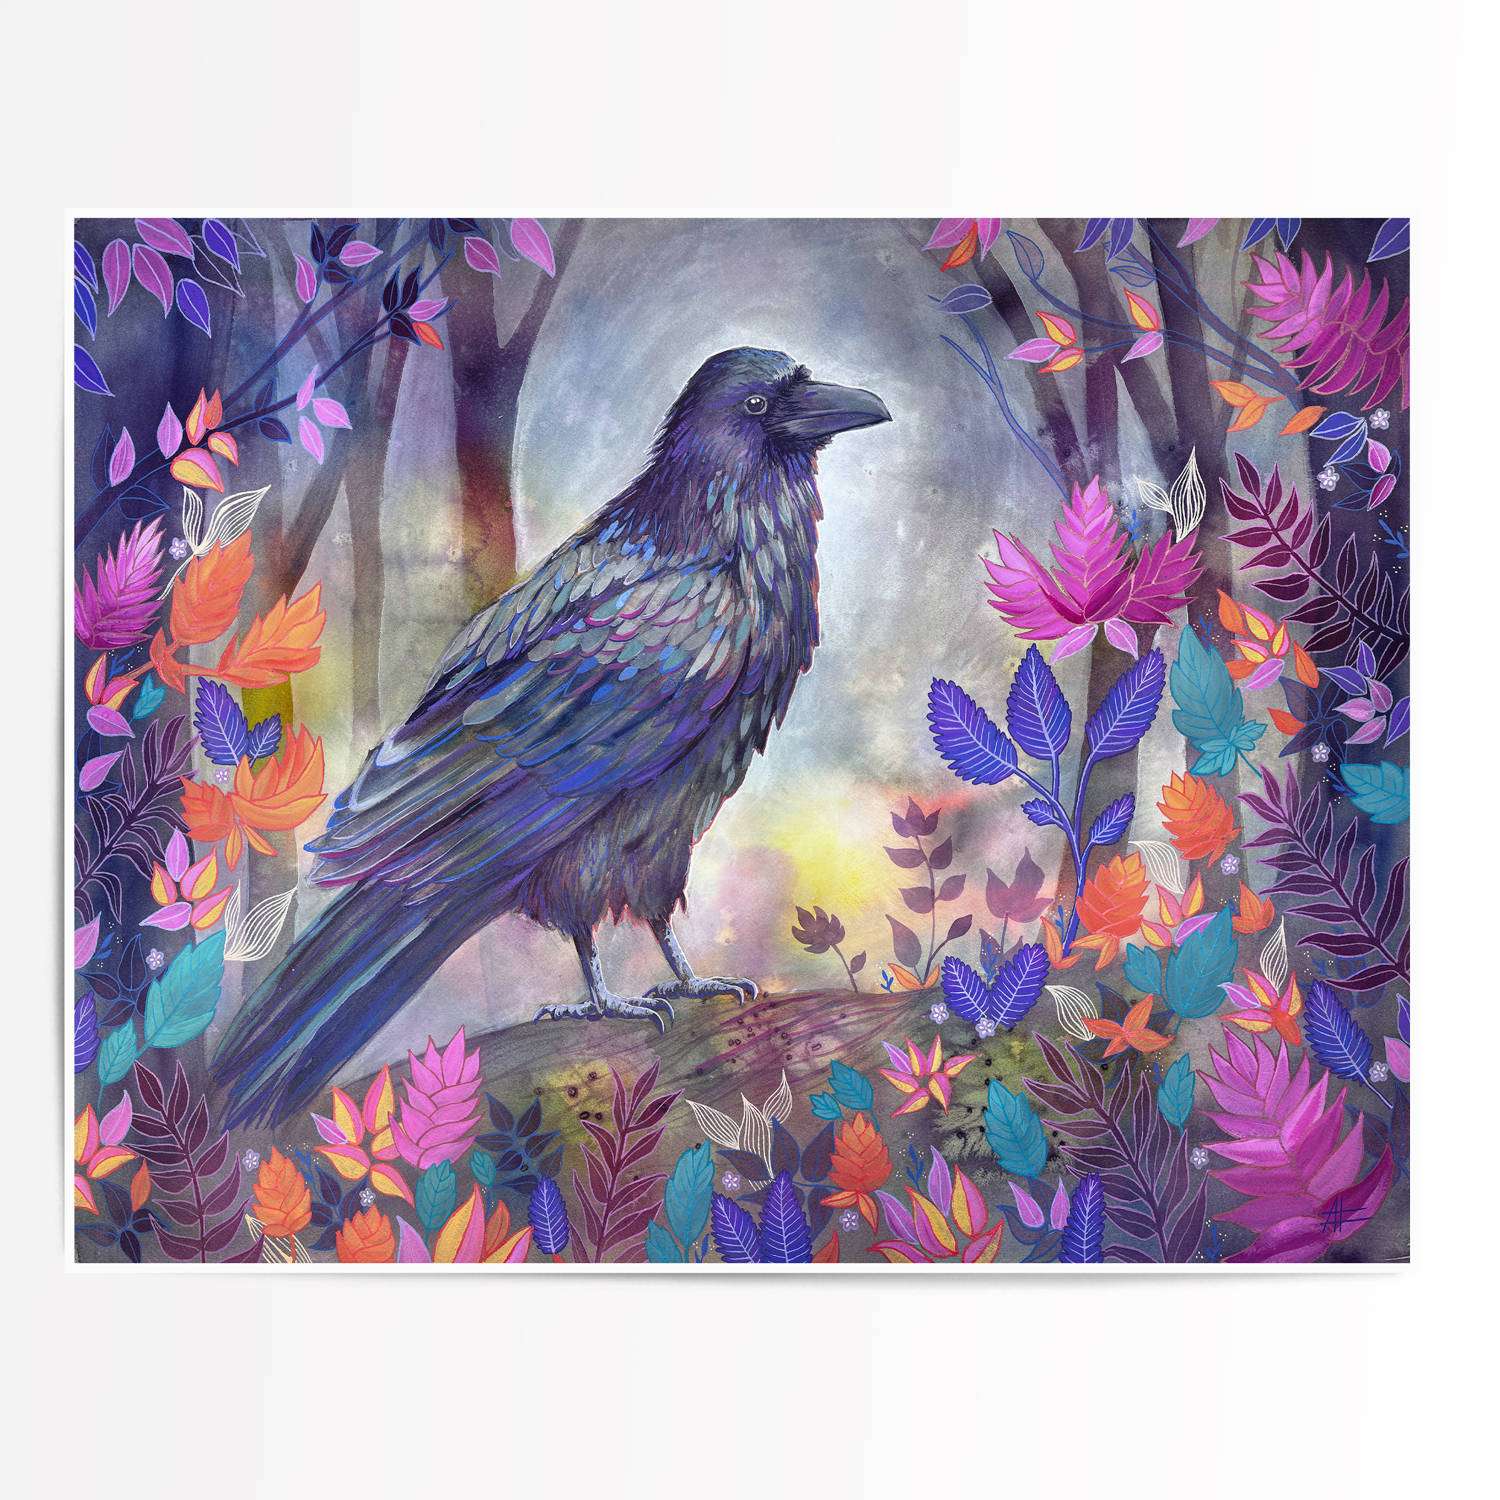 Single large art print of a raven among vivid foliage, demonstrating intricate detail and color.